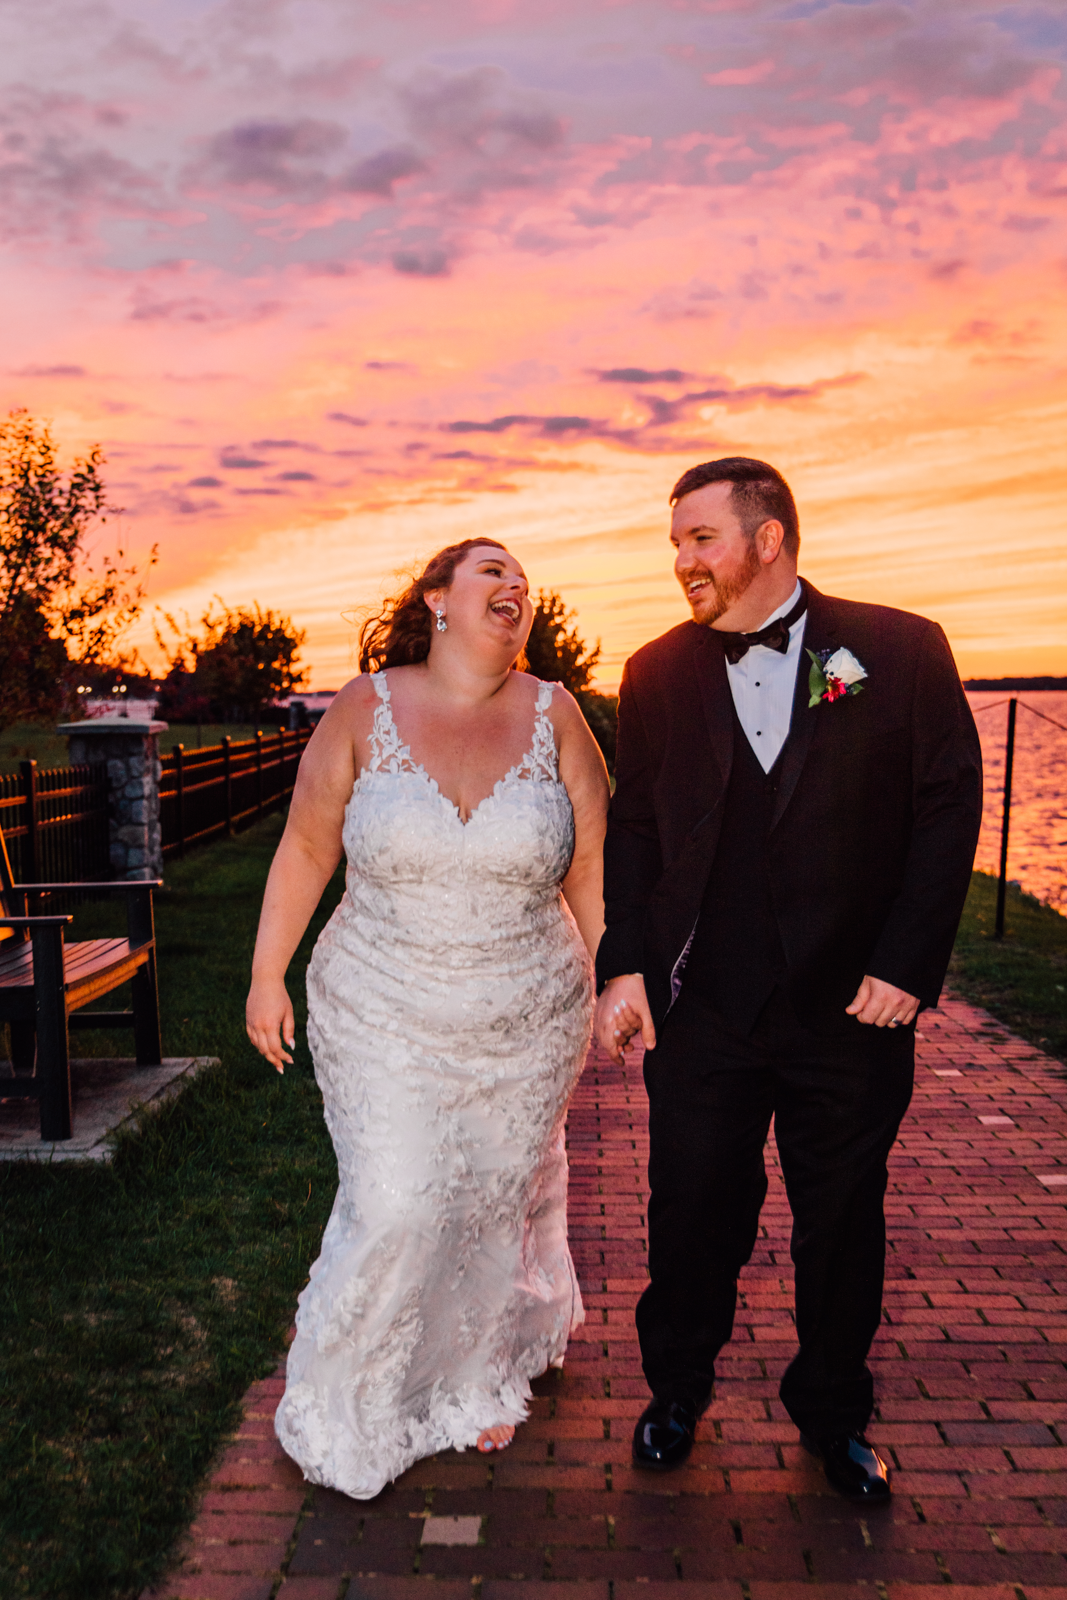  Bride and Groom laugh while walking hand-in-hand during sunset wedding photos in Clayton NY 